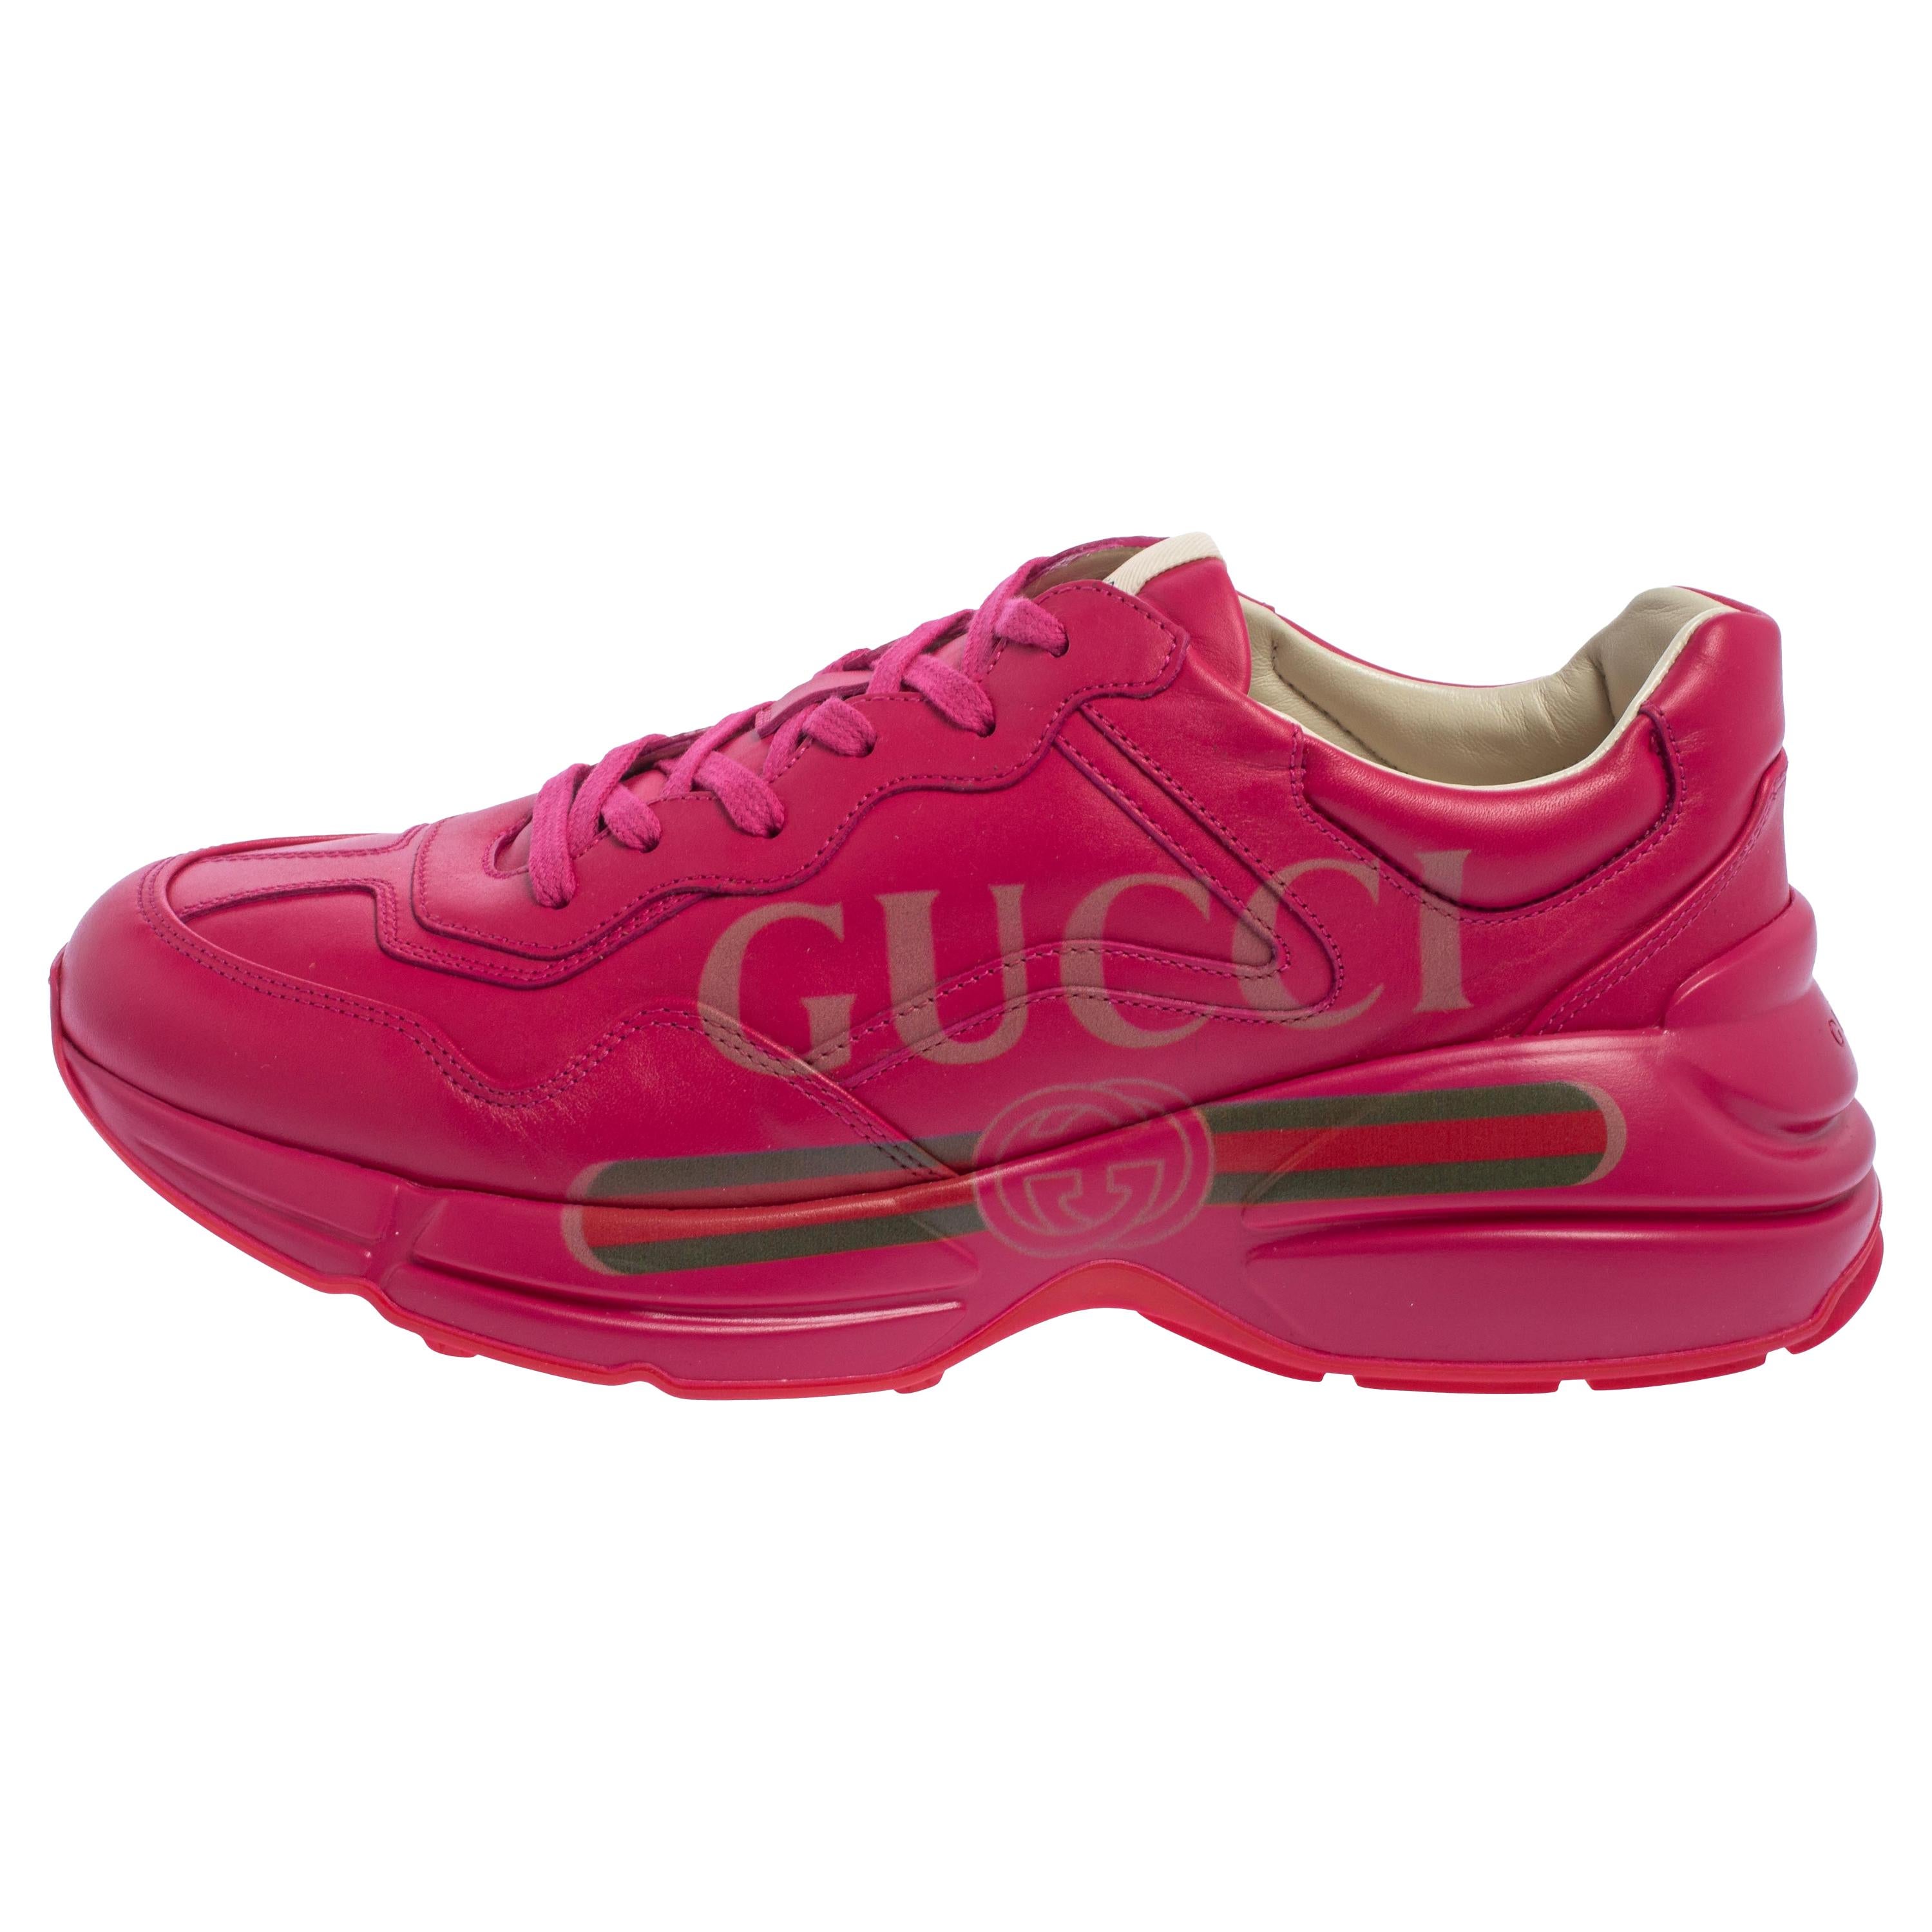 Gucci Pink Leather Rhyton Logo Print Low Top Sneakers Size 42